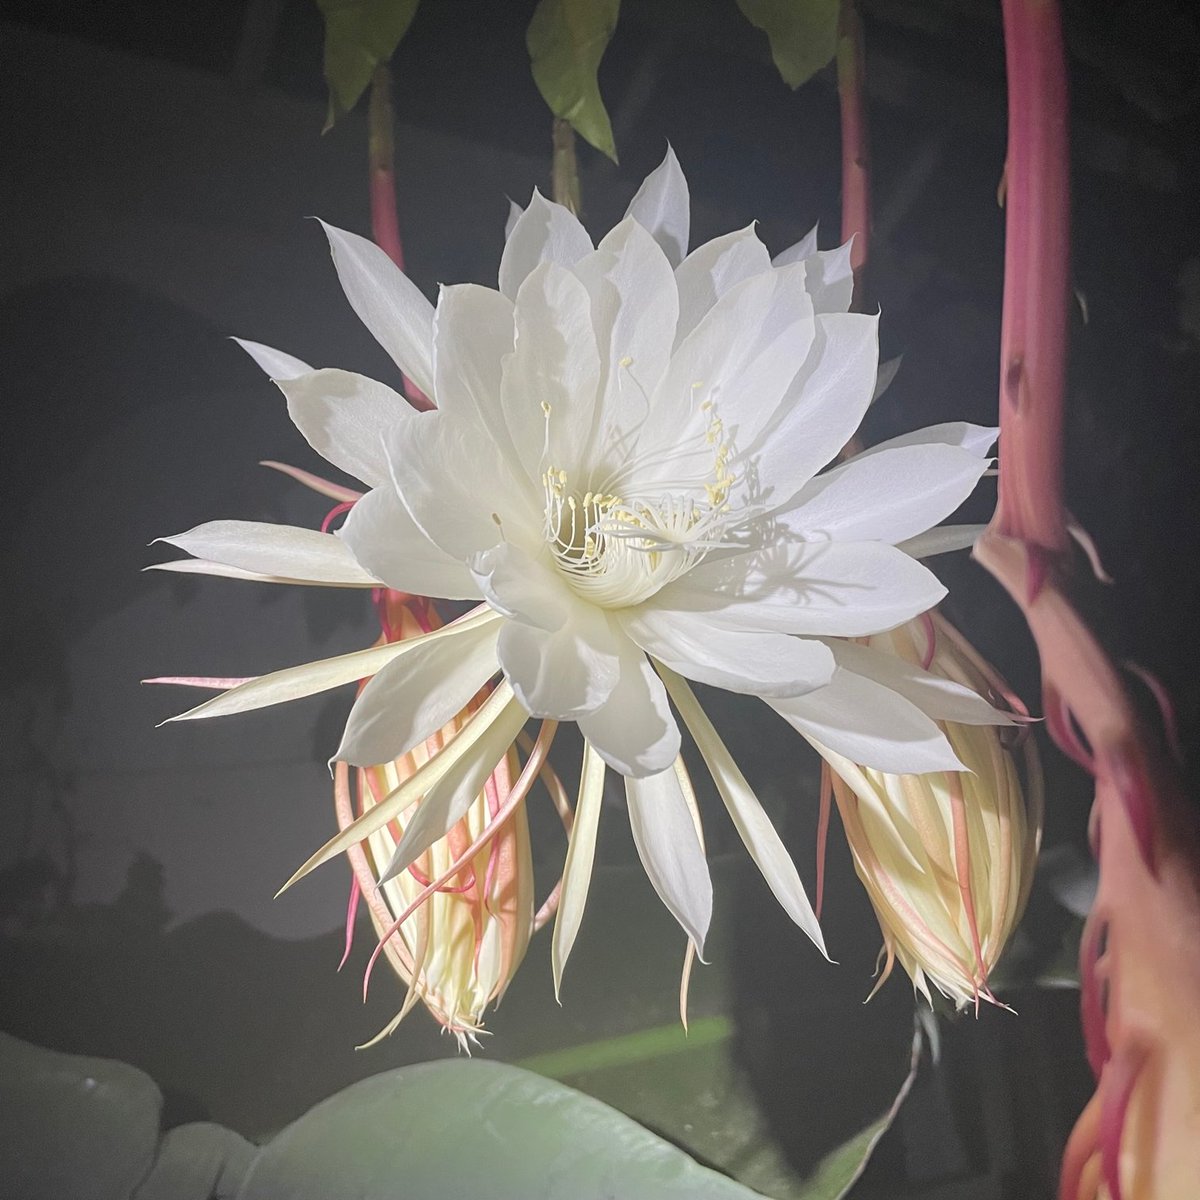 She's Out! At 10:30 p.m. last night, we managed to see the illusive flower of the Queen of the Night. It was such a stunning flower and had an incredible sweet scent. The flowers had wilted by dawn, making the sighting all the more precious.